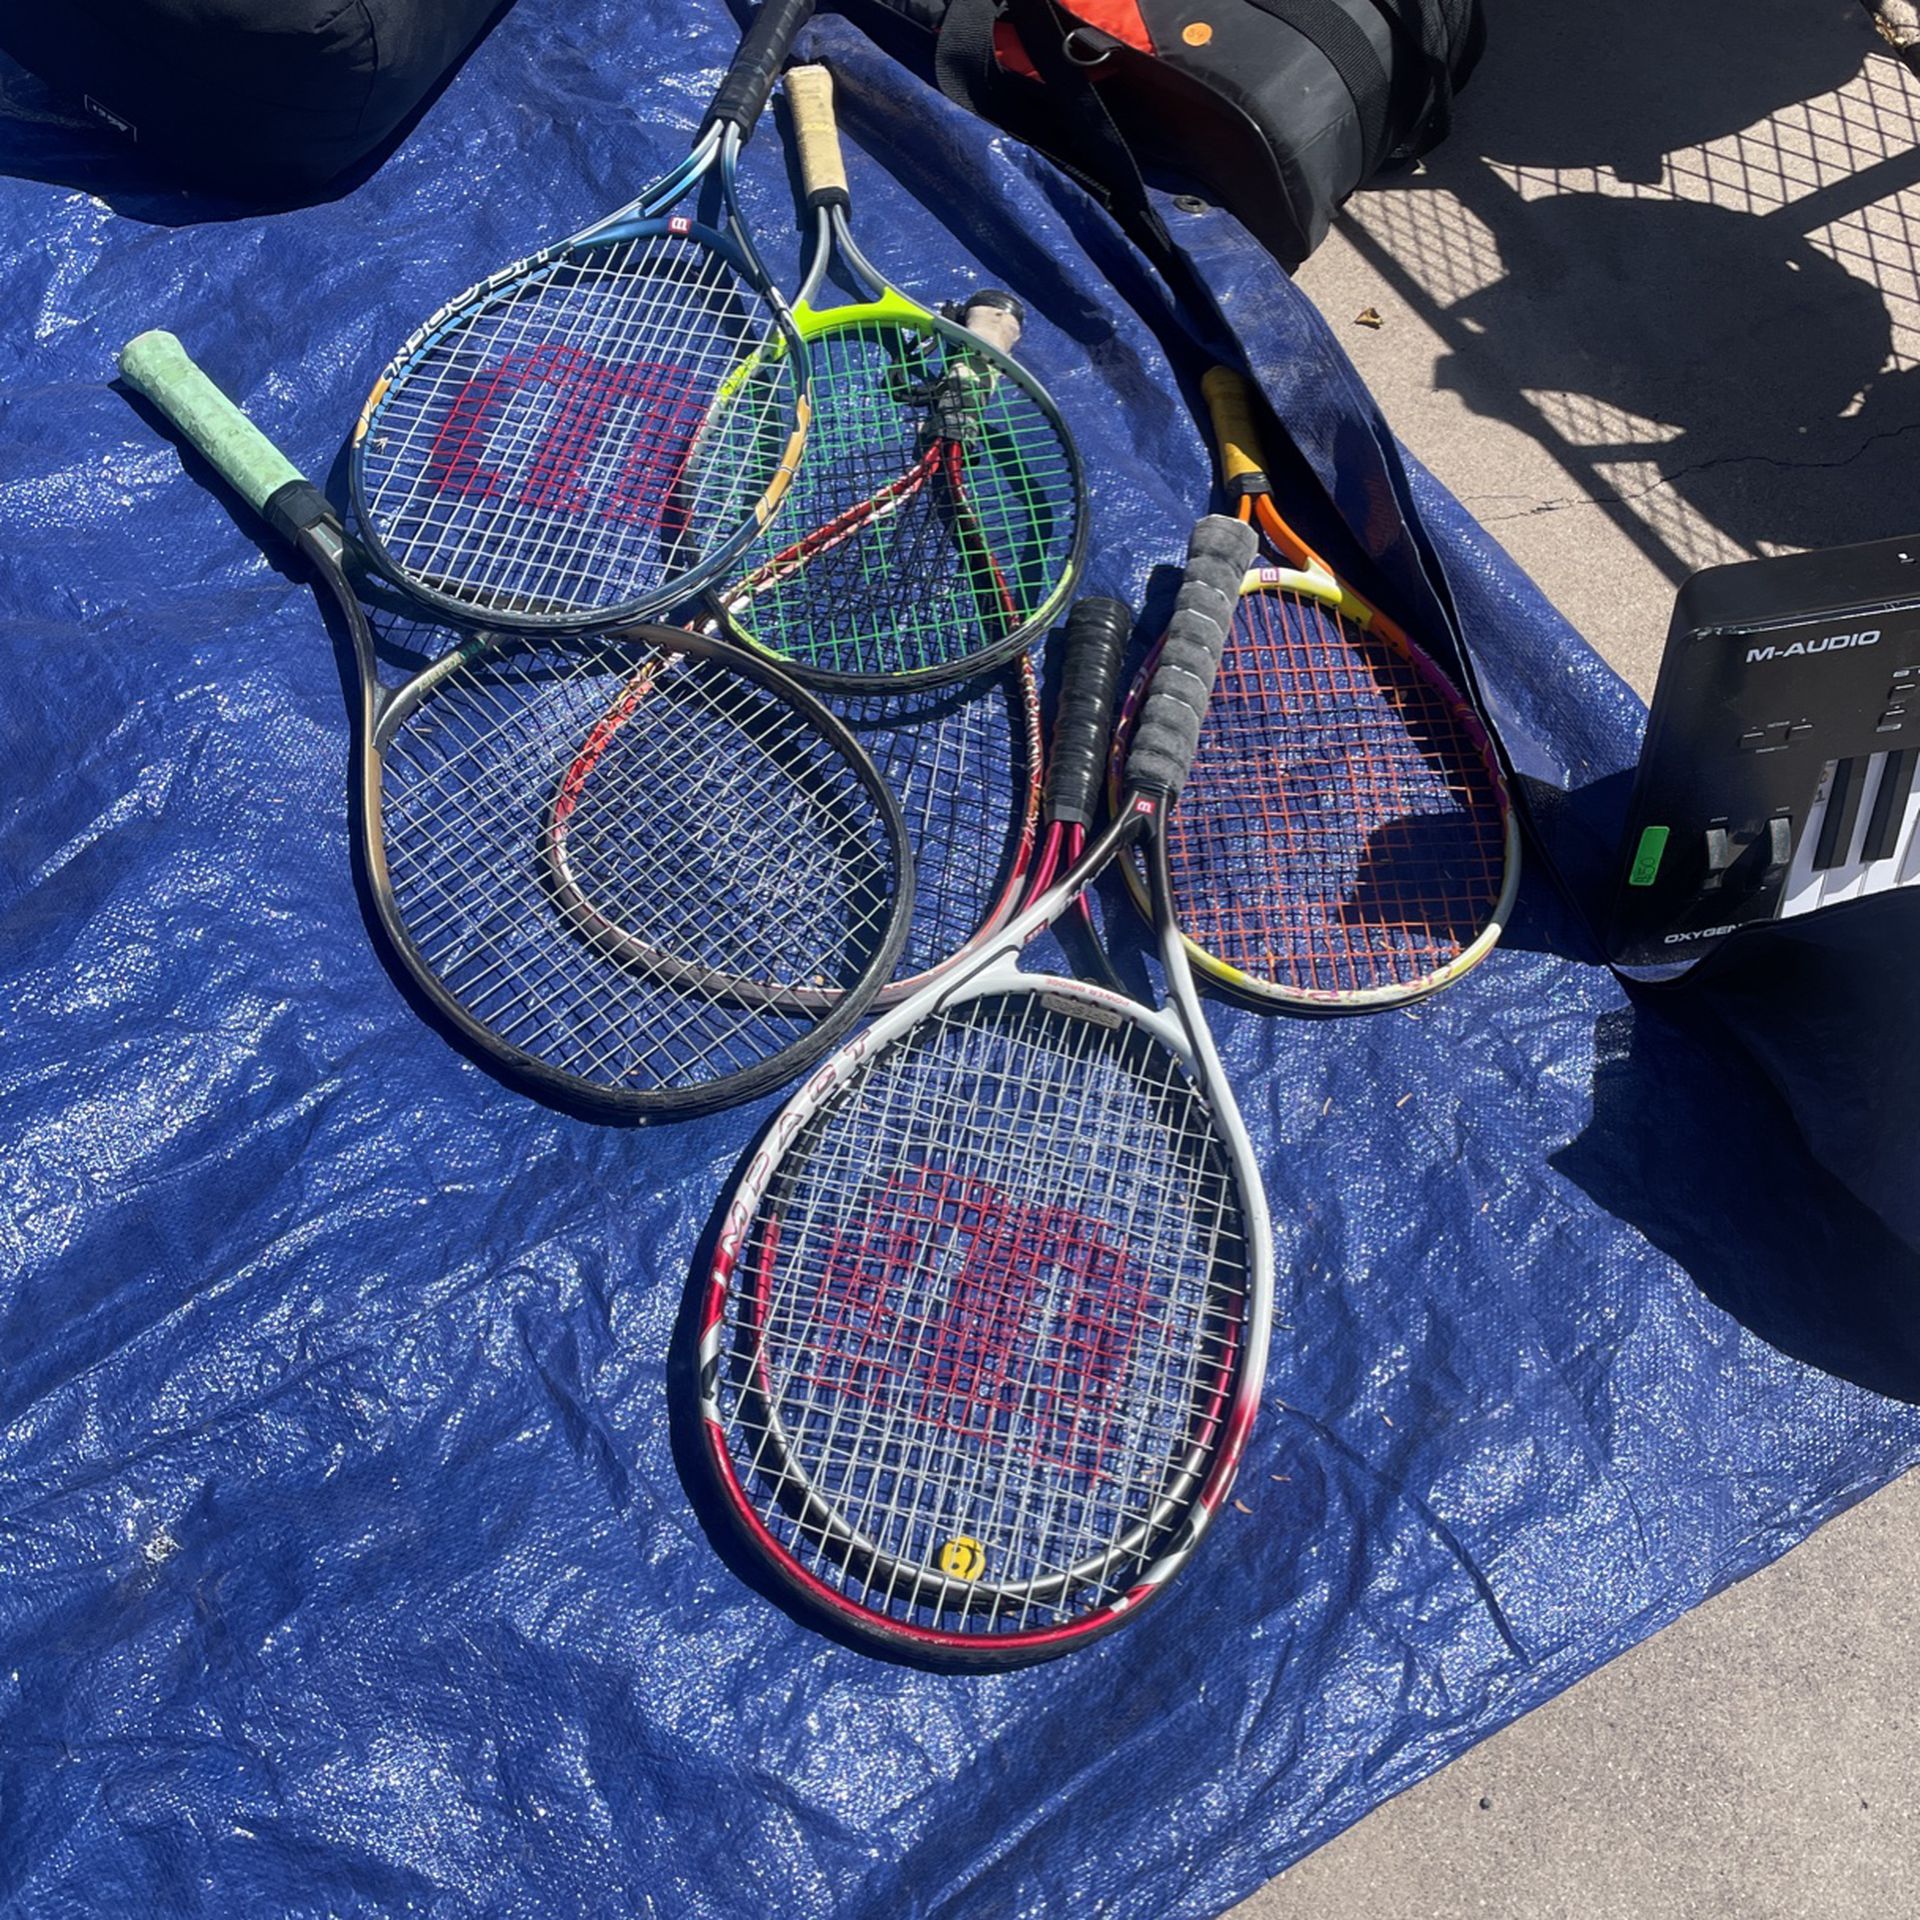 7 Wilson Rackets All Sizes ! 